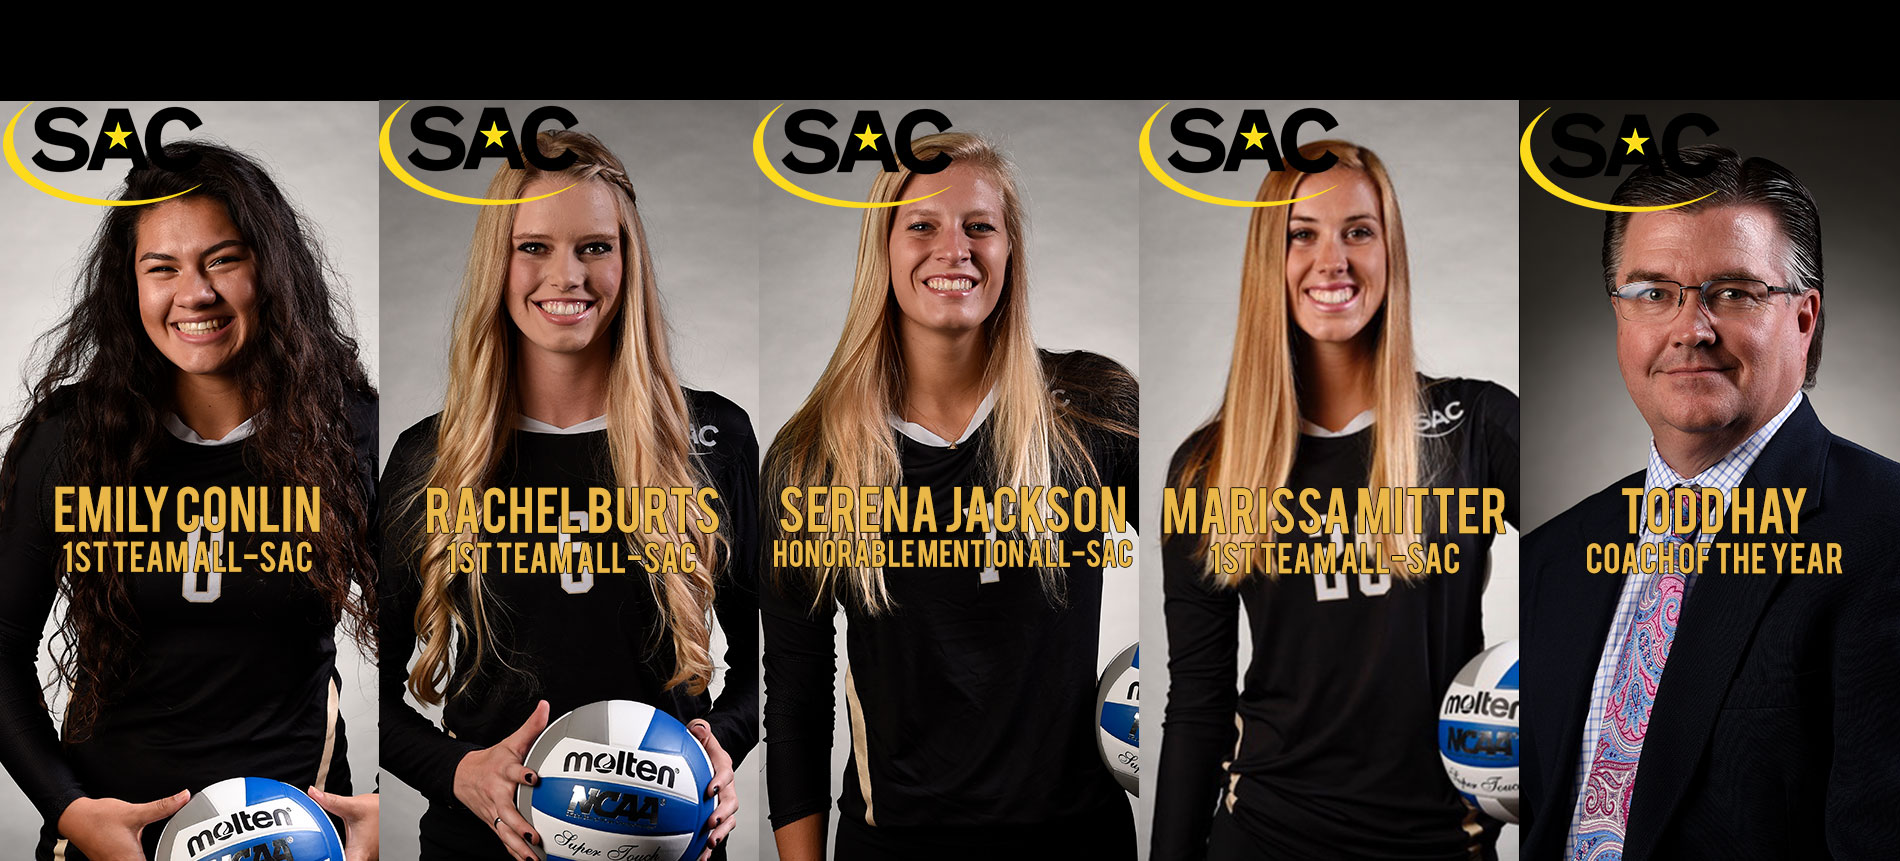 Four Trojans Earn All-South Atlantic Conference Volleyball Honors; Hay Named Coach of the Year